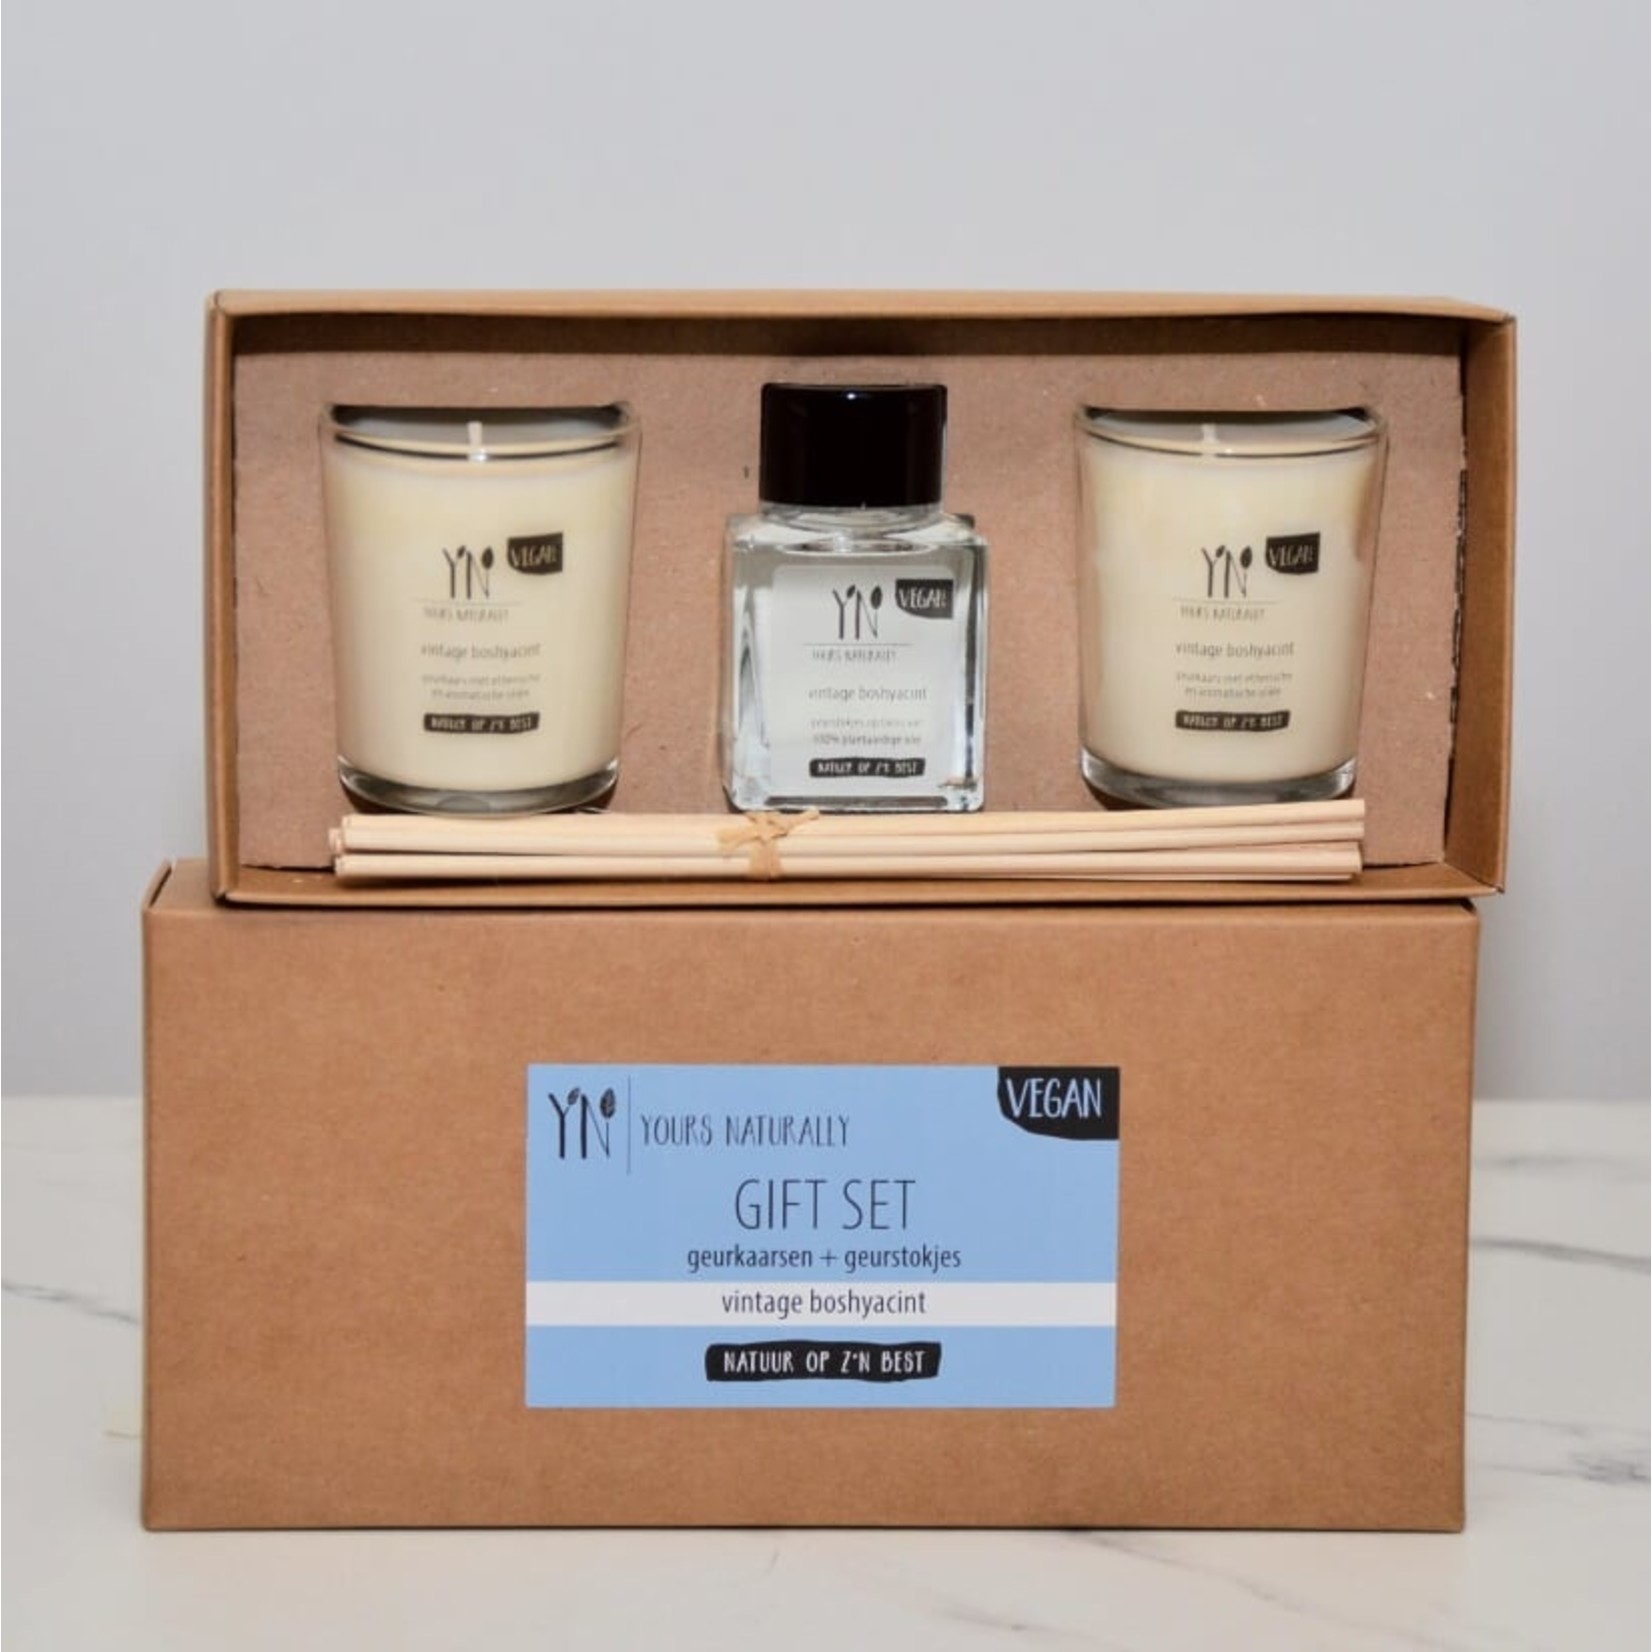 Yours naturally Coffret dorloter vintage bluebell